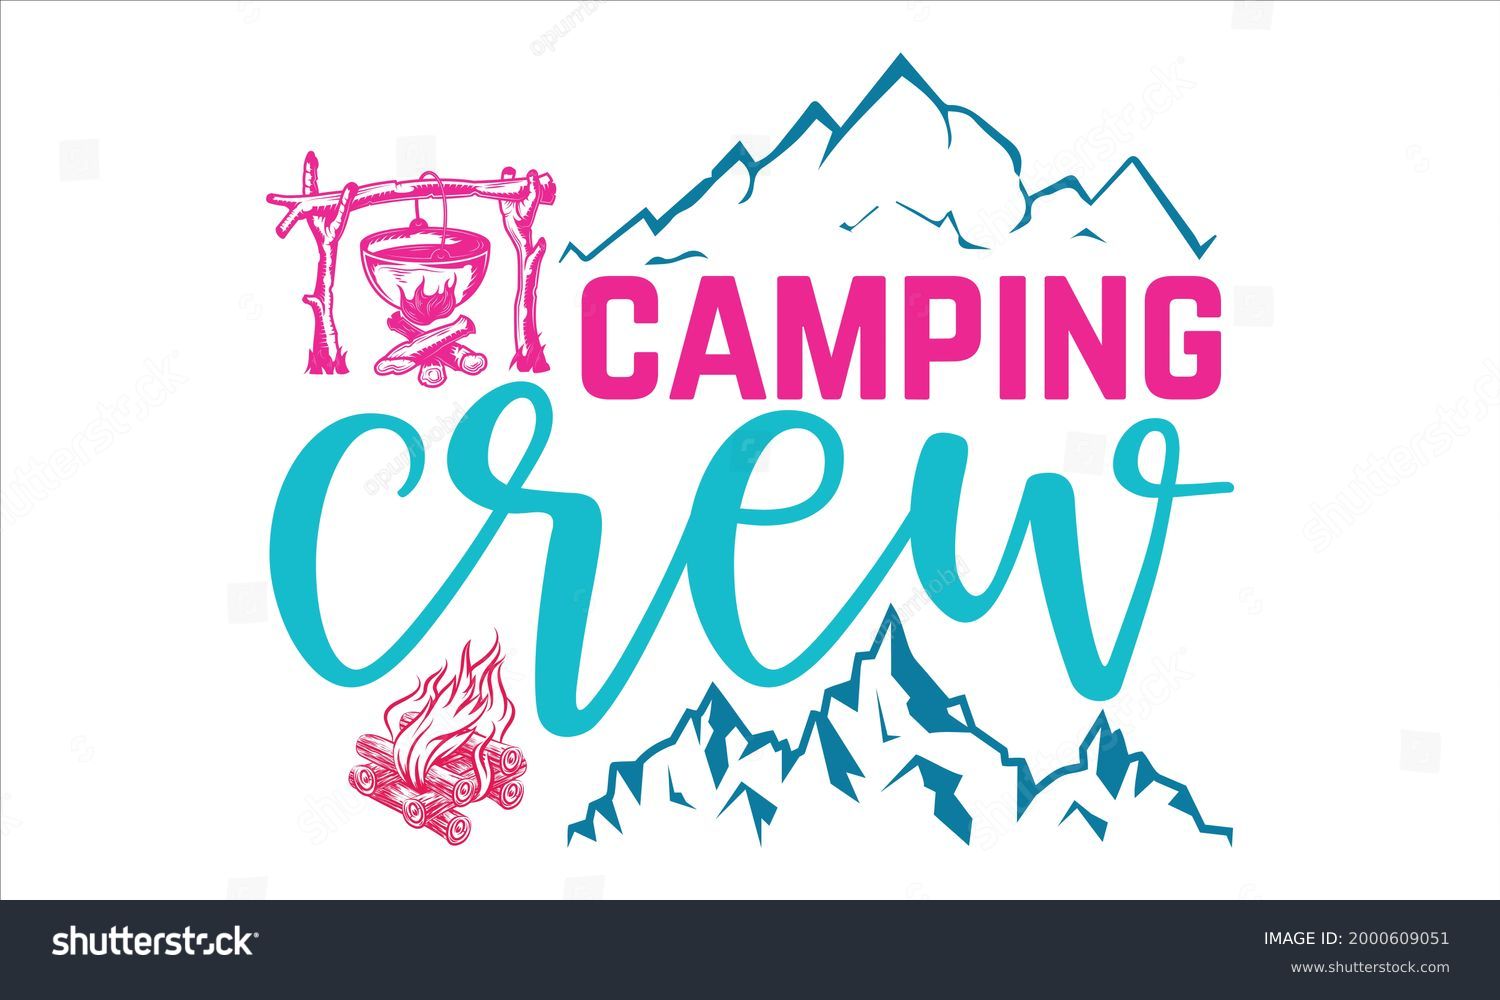 SVG of Camping crew- Camping t shirts design, Hand drawn lettering phrase, Calligraphy t shirt design, Isolated on white background, svg Files for Cutting Cricut and Silhouette, EPS 10 svg